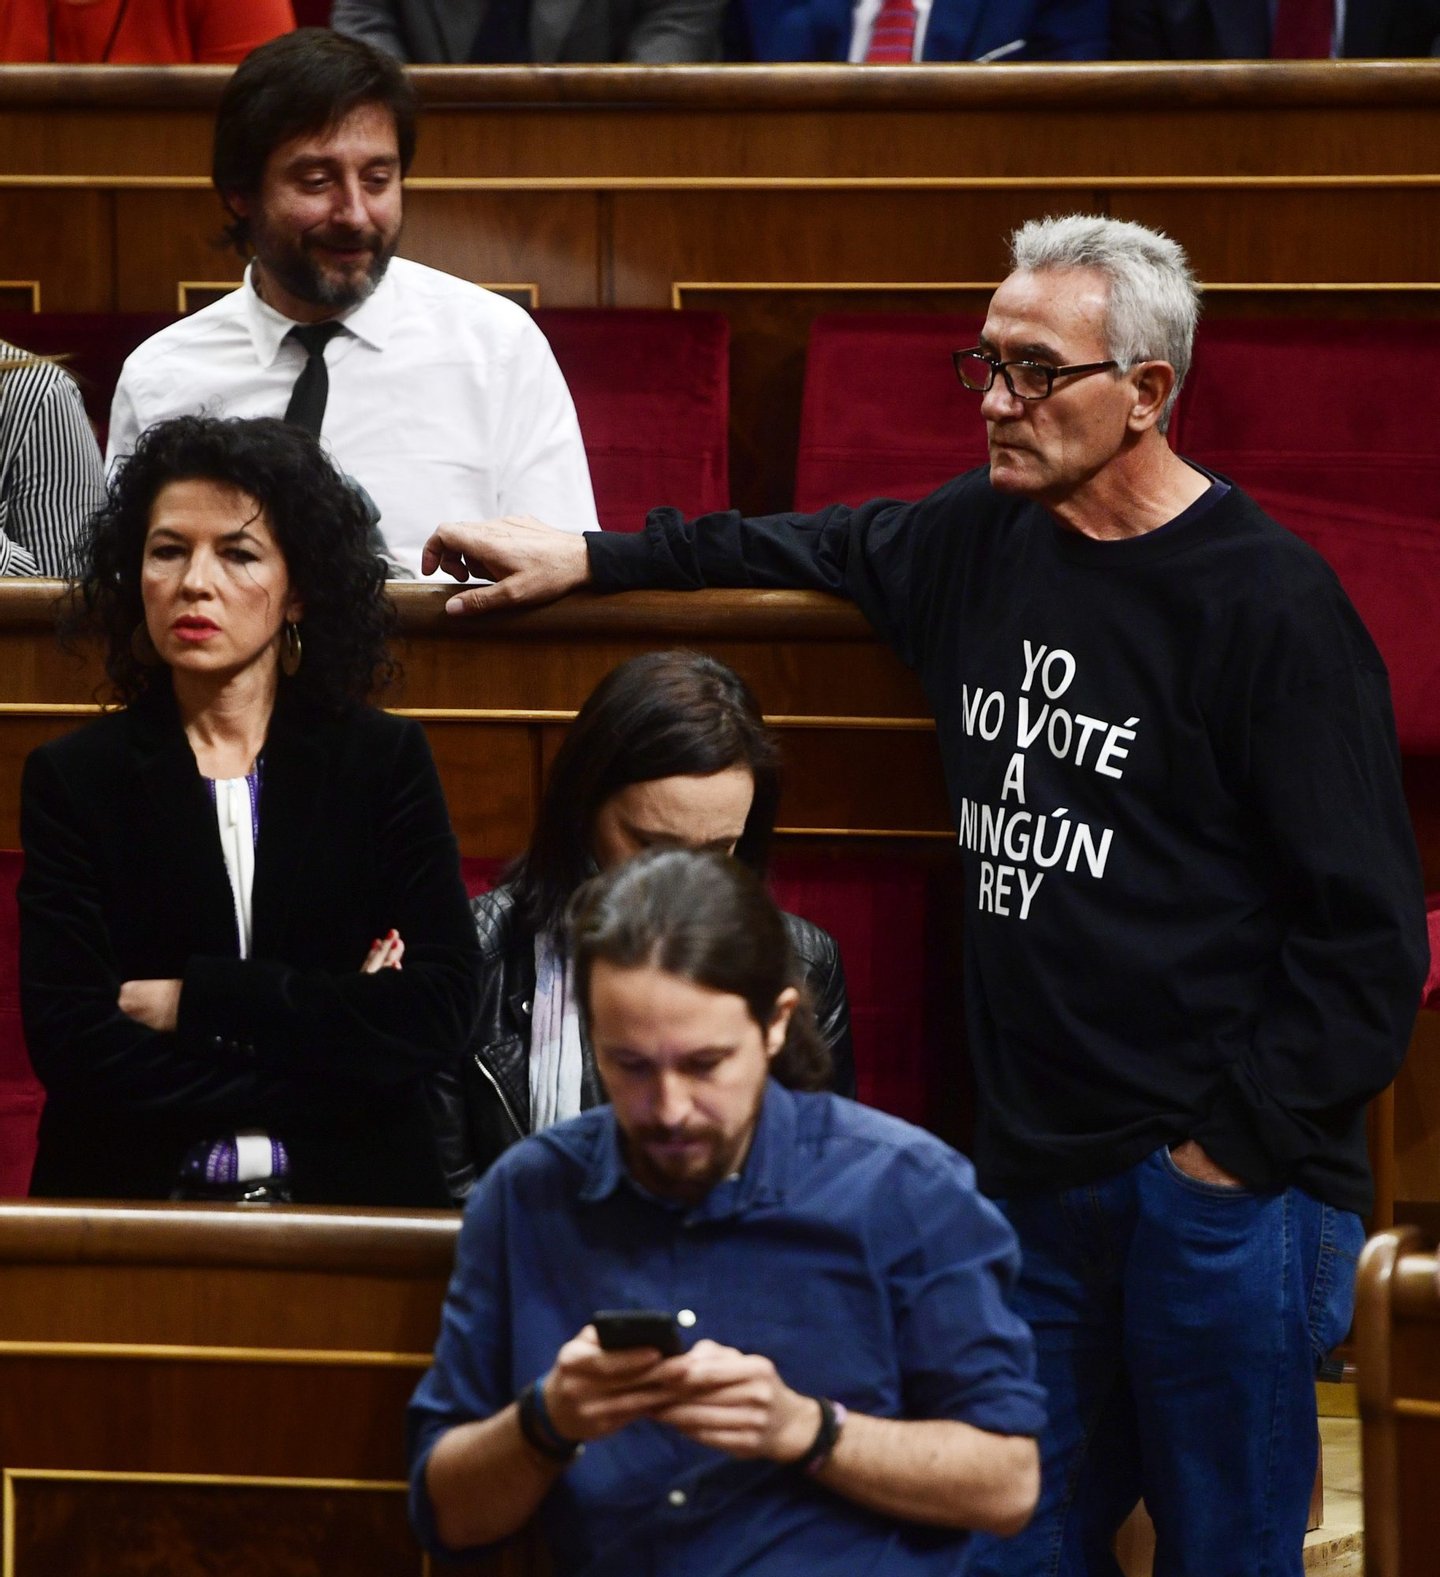 Left-wing party Podemos MP, Diego Canamero (R) sports a shirt reading "I didn't vote any king" before the celebration of the Spanish Congress' 12th legislature opening ceremony at the Spanish parliament, on November 17, 2016 in Madrid. / AFP / PIERRE-PHILIPPE MARCOU (Photo credit should read PIERRE-PHILIPPE MARCOU/AFP/Getty Images)